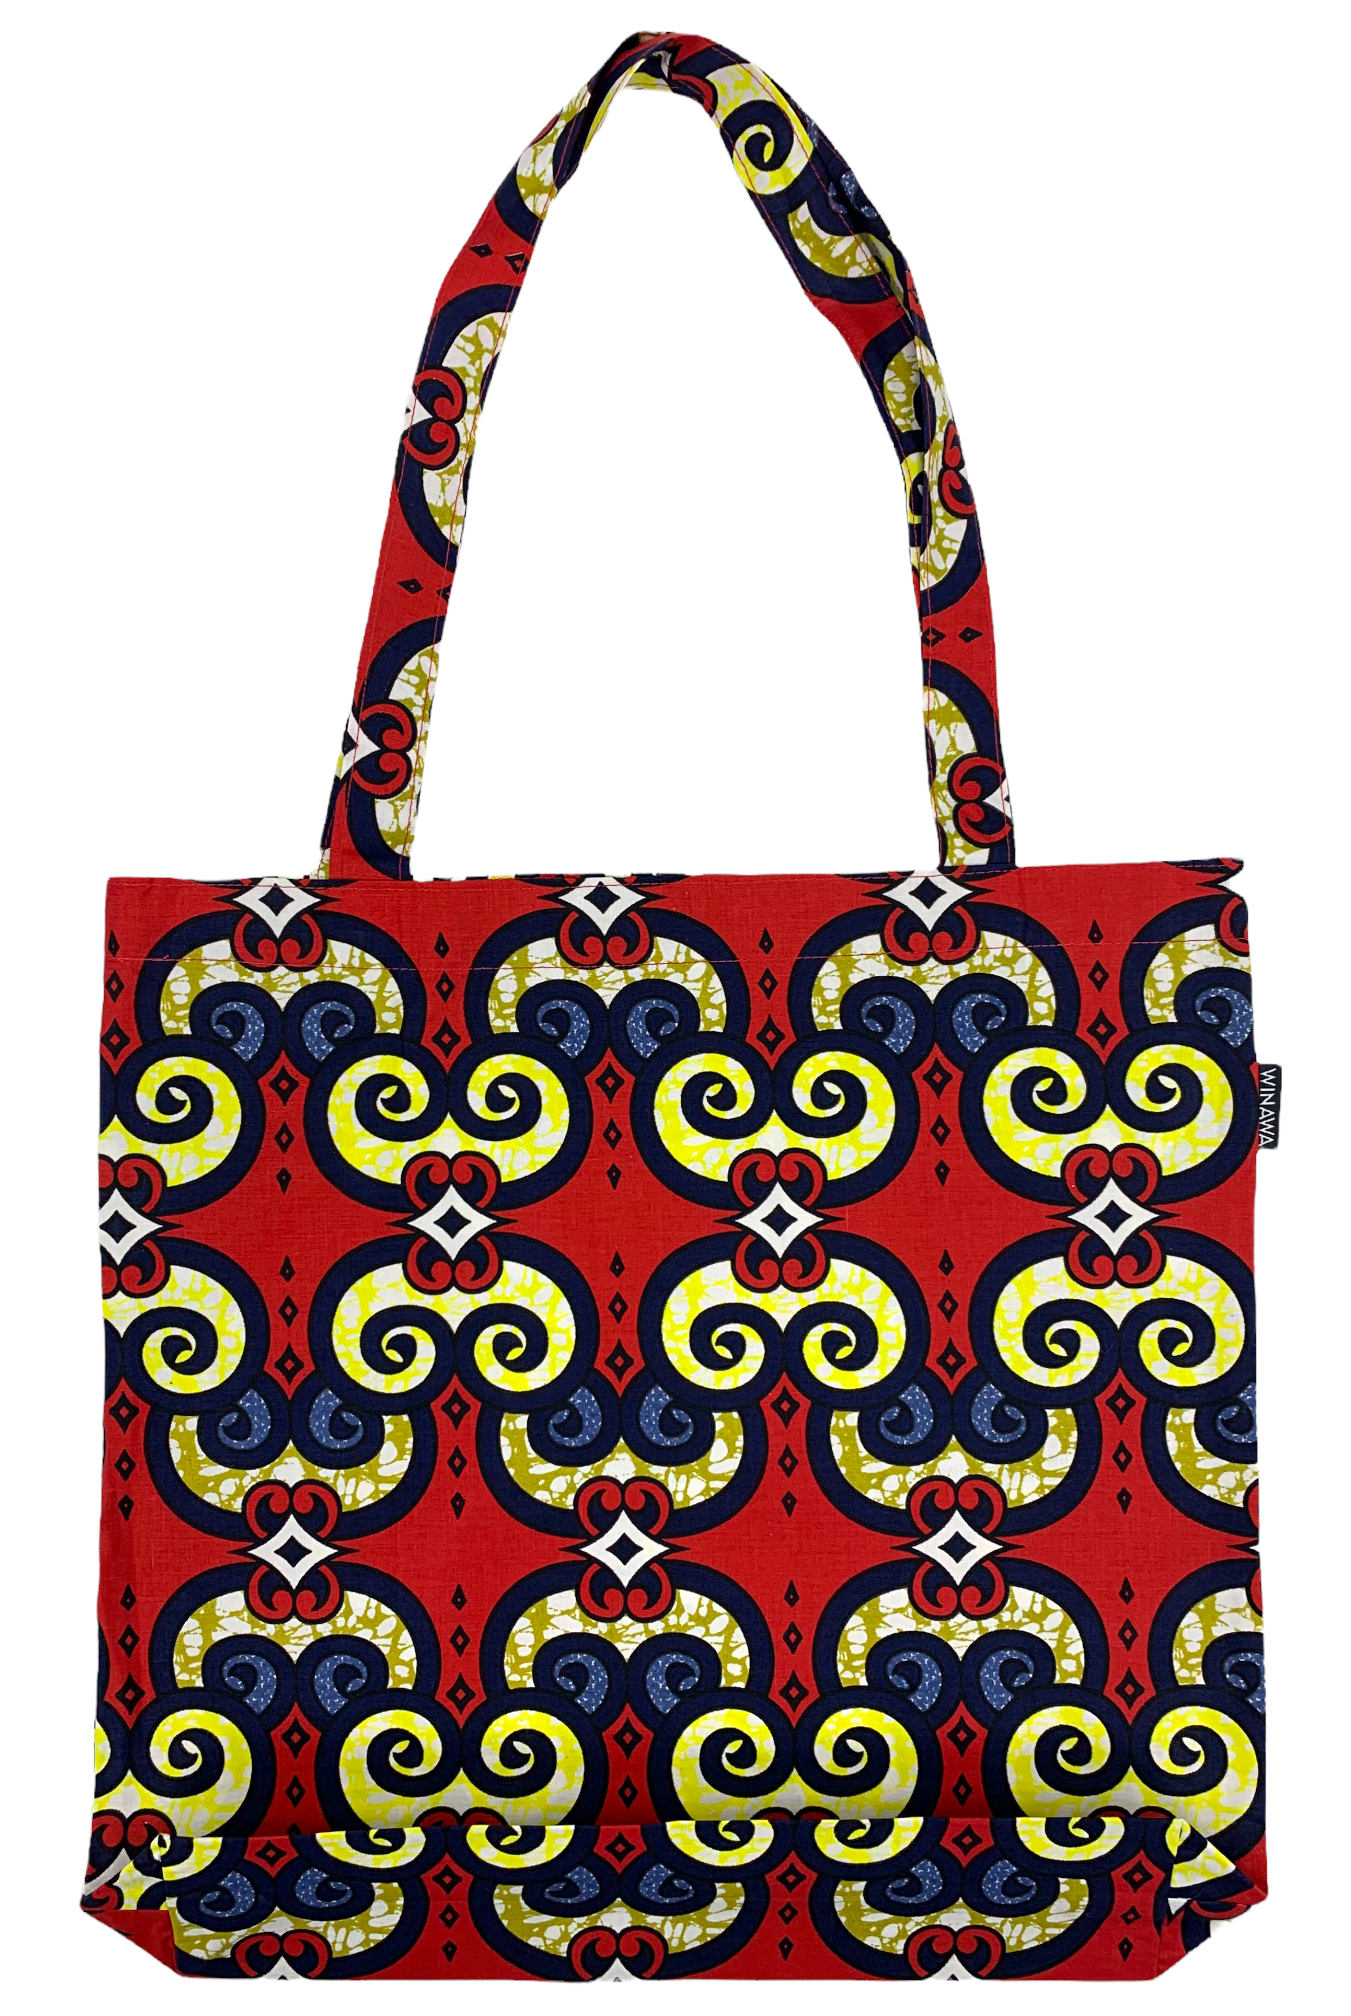 AFRICAN ECO FRIENDLY TOTE BAG